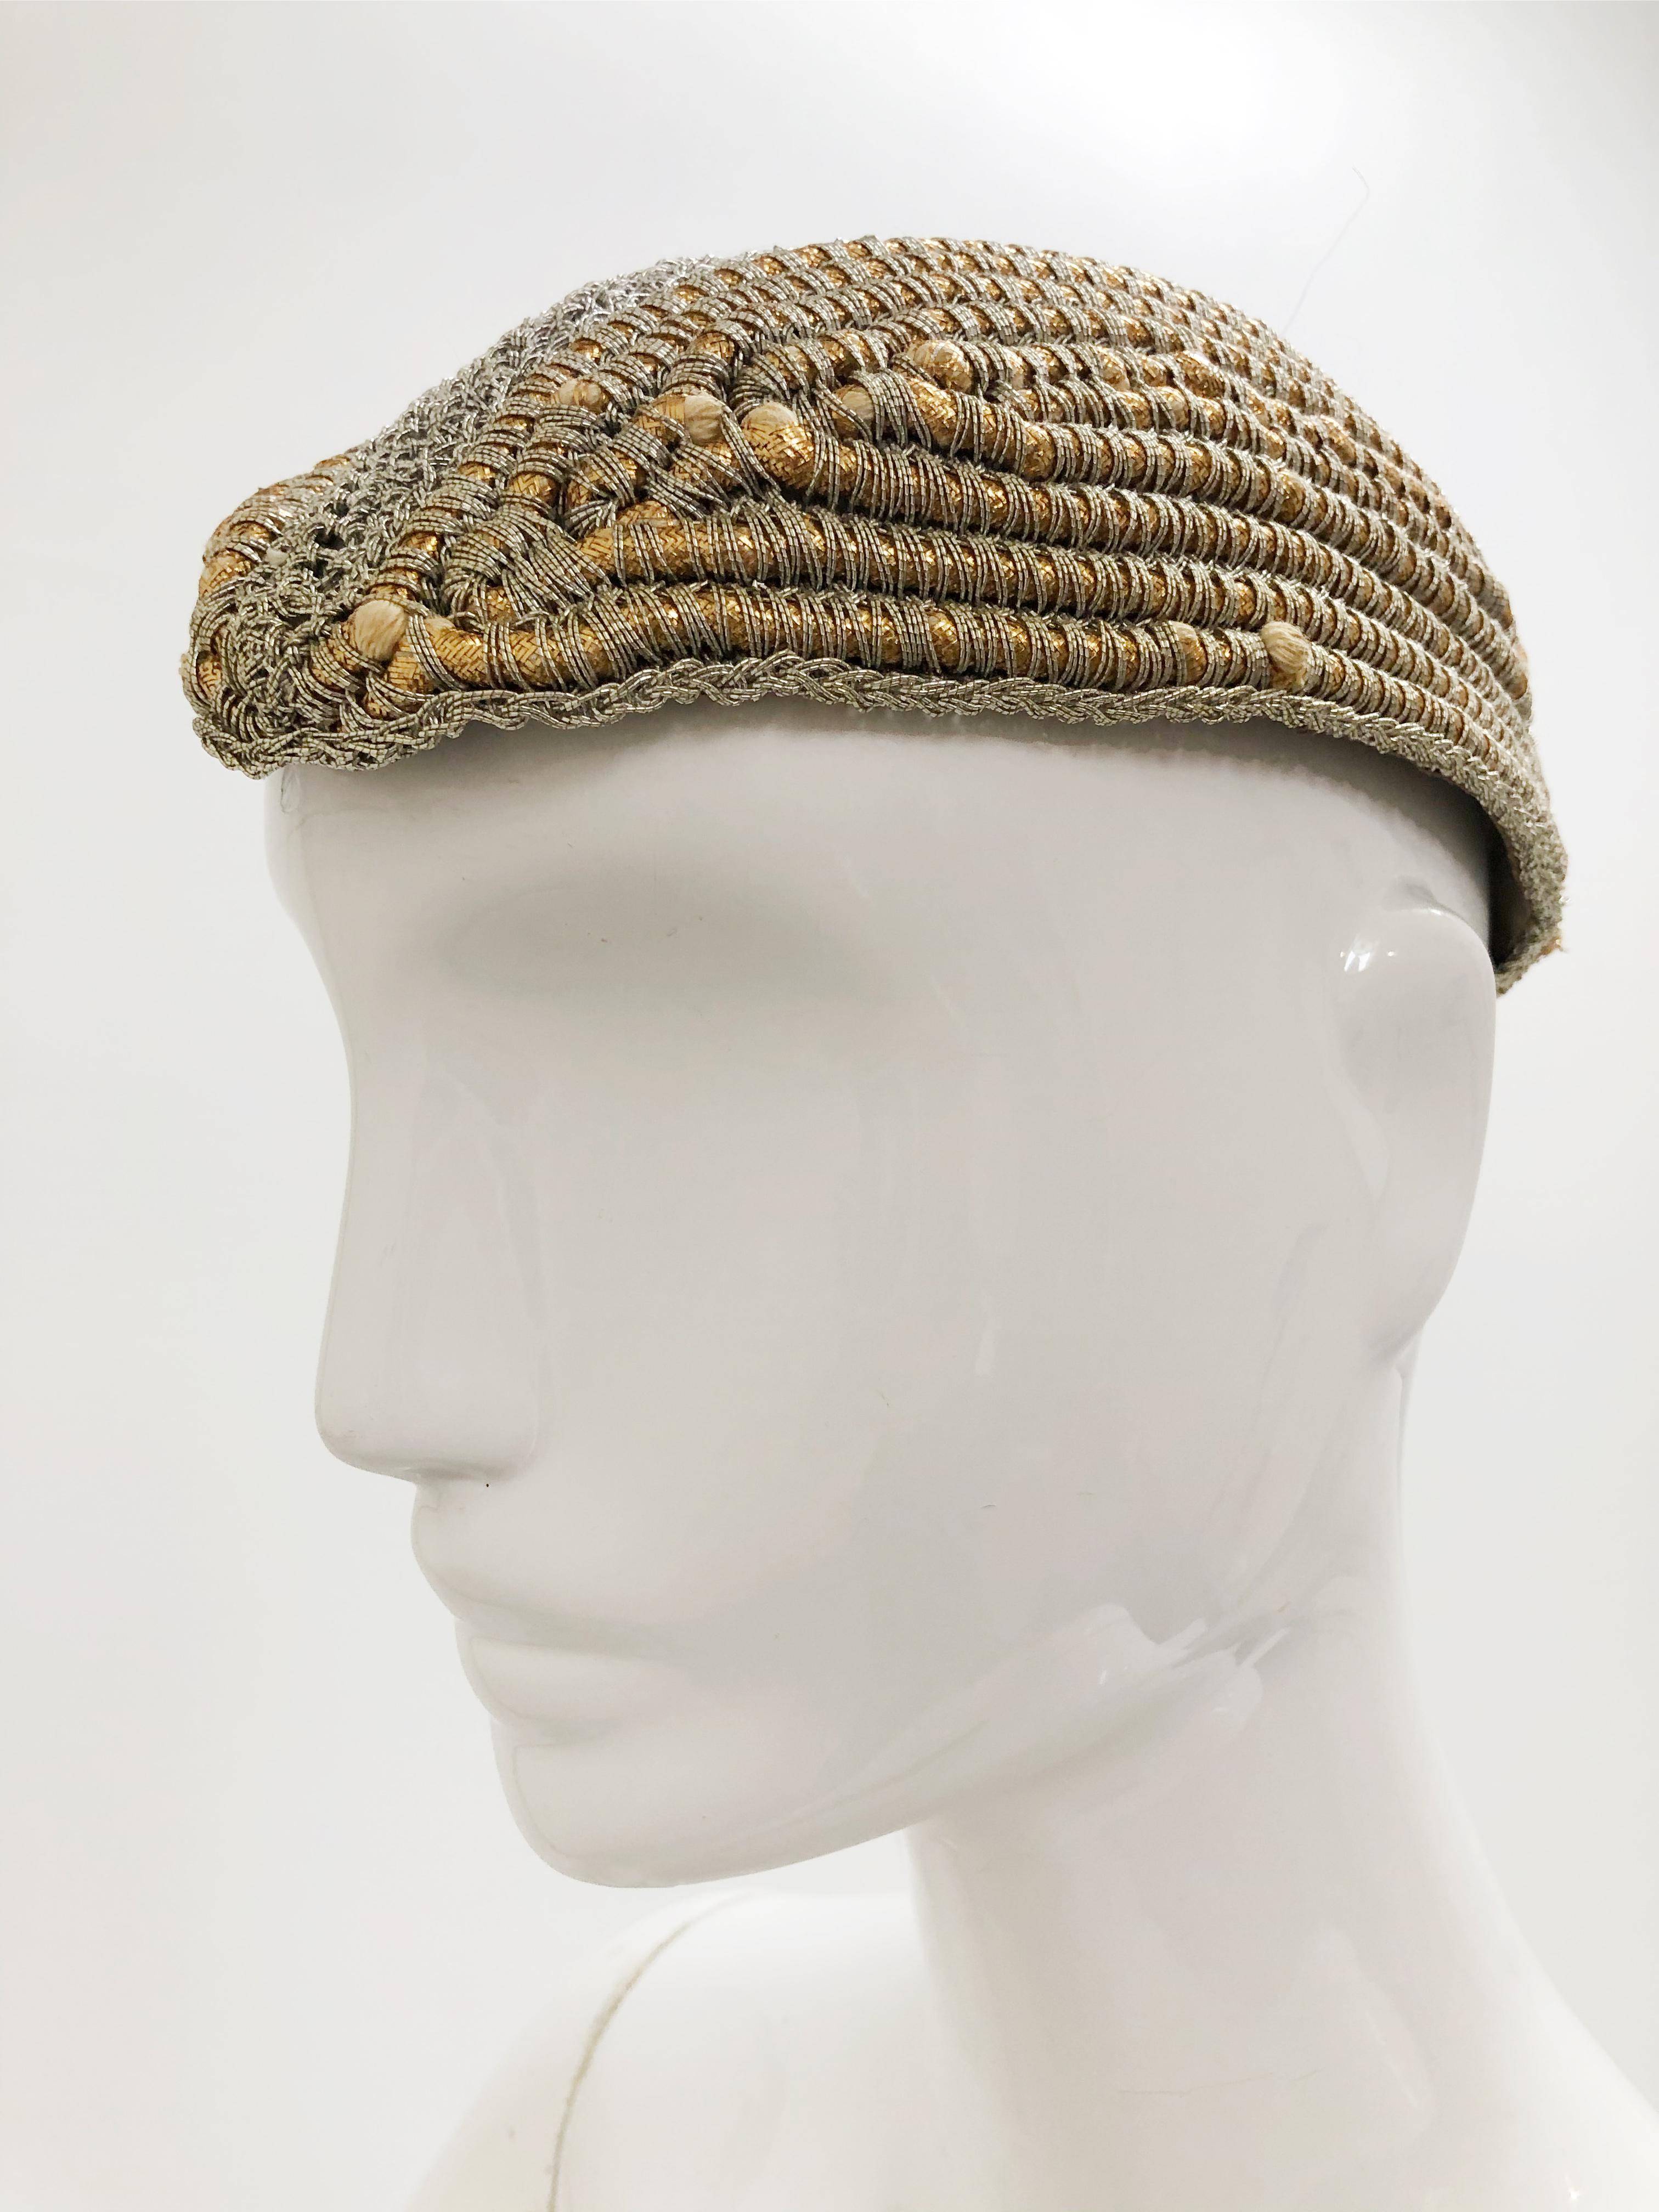 1940 John Frederics Custom Design Woven Silver & Gold Metallic Evening Hat  In Excellent Condition For Sale In Gresham, OR